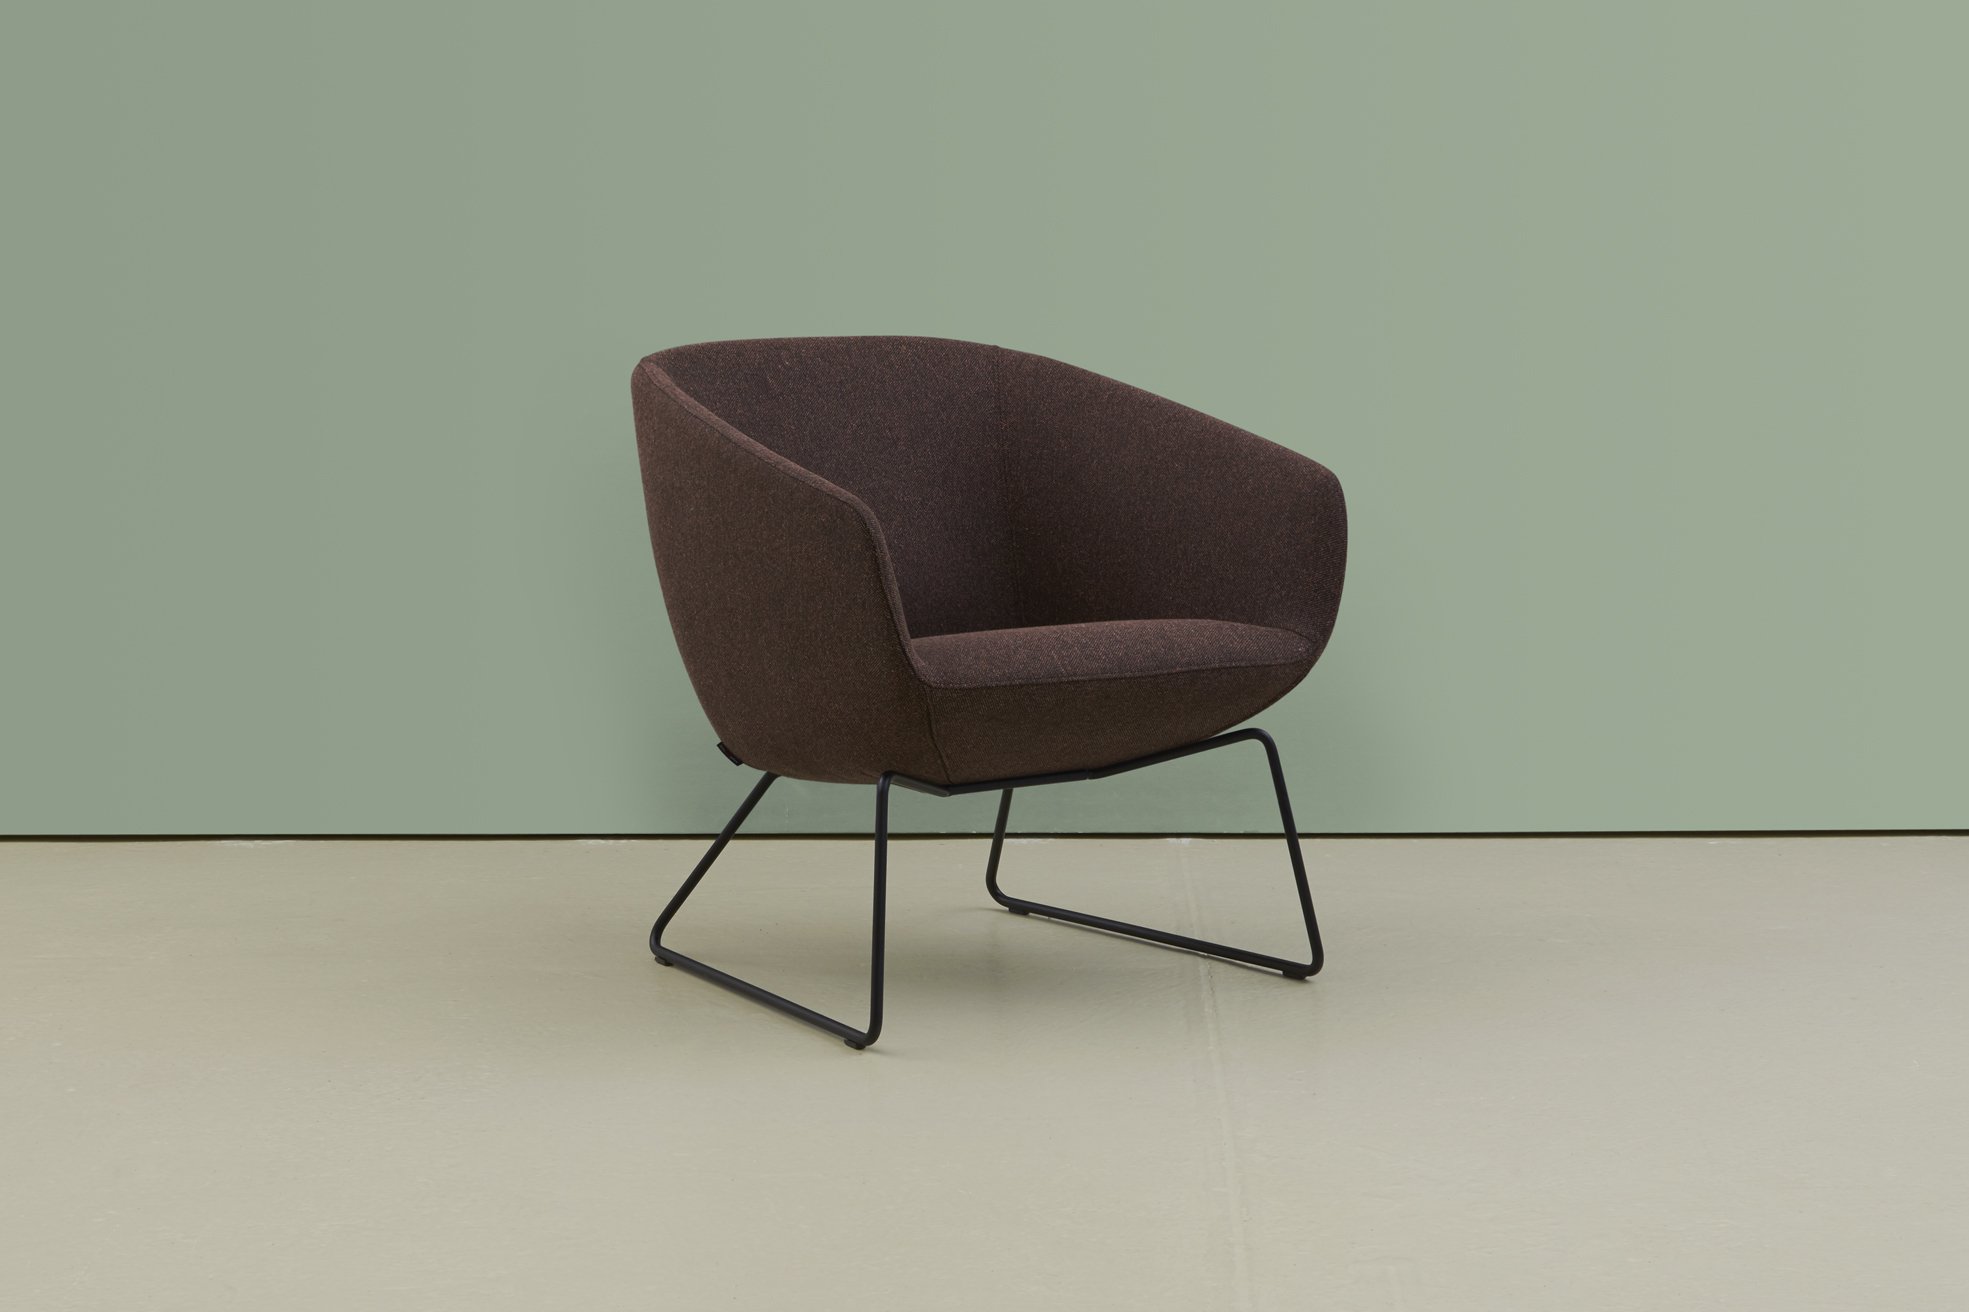 hm22 lounge chair (low res).jpg